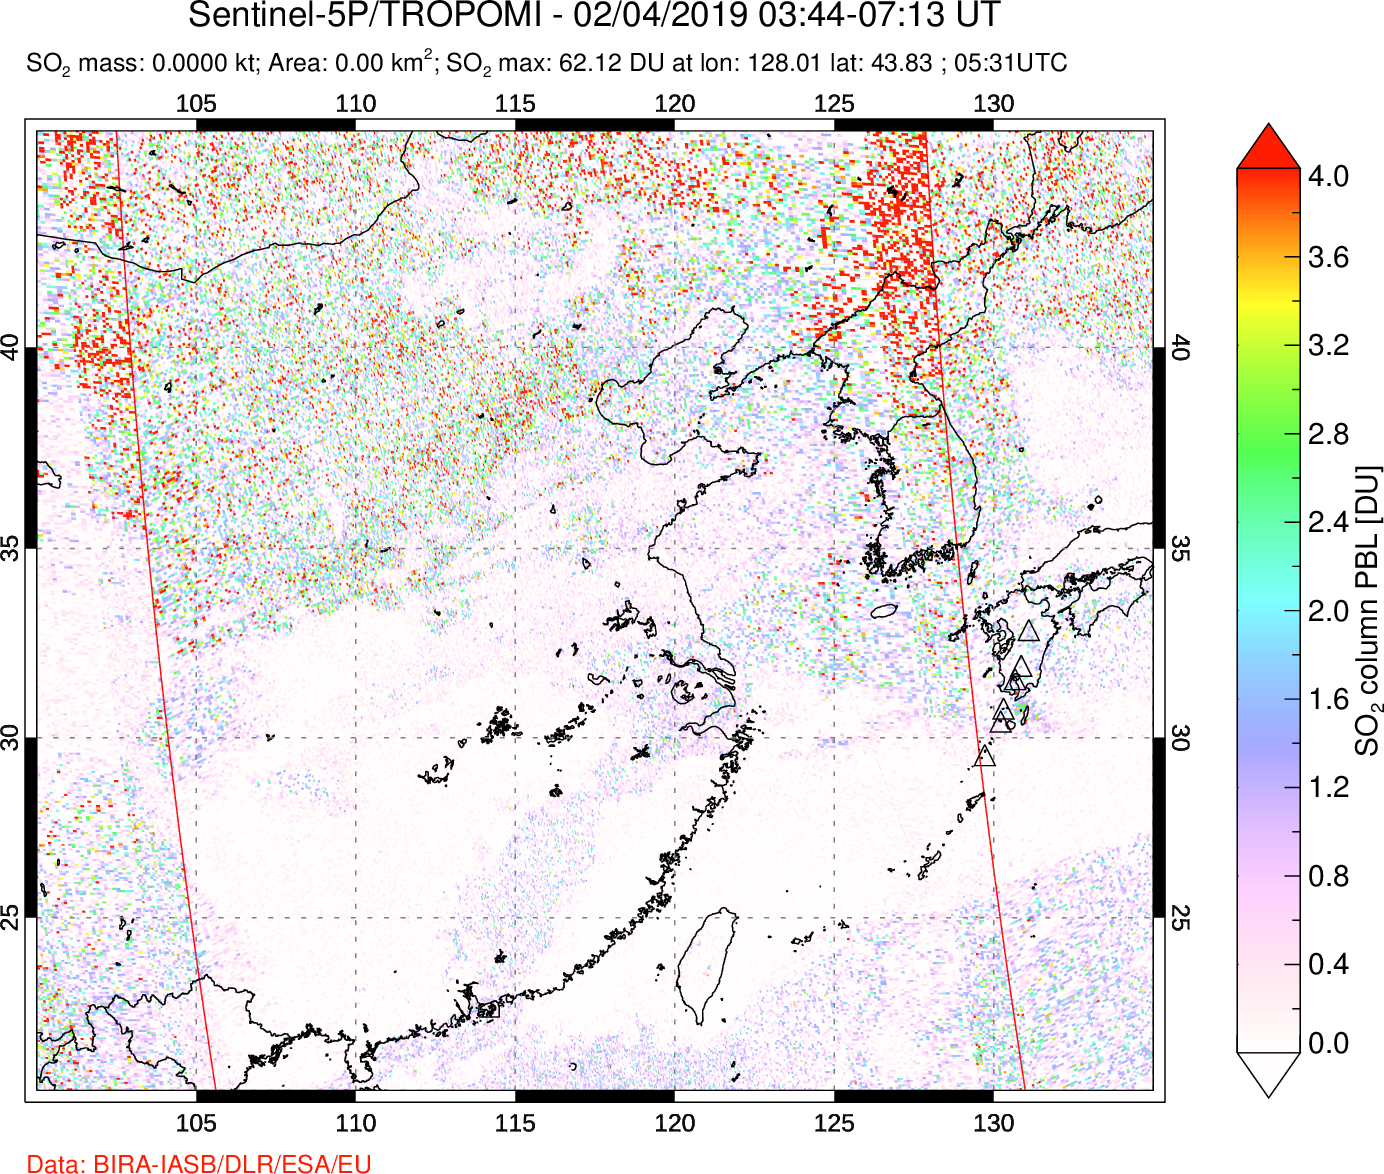 A sulfur dioxide image over Eastern China on Feb 04, 2019.